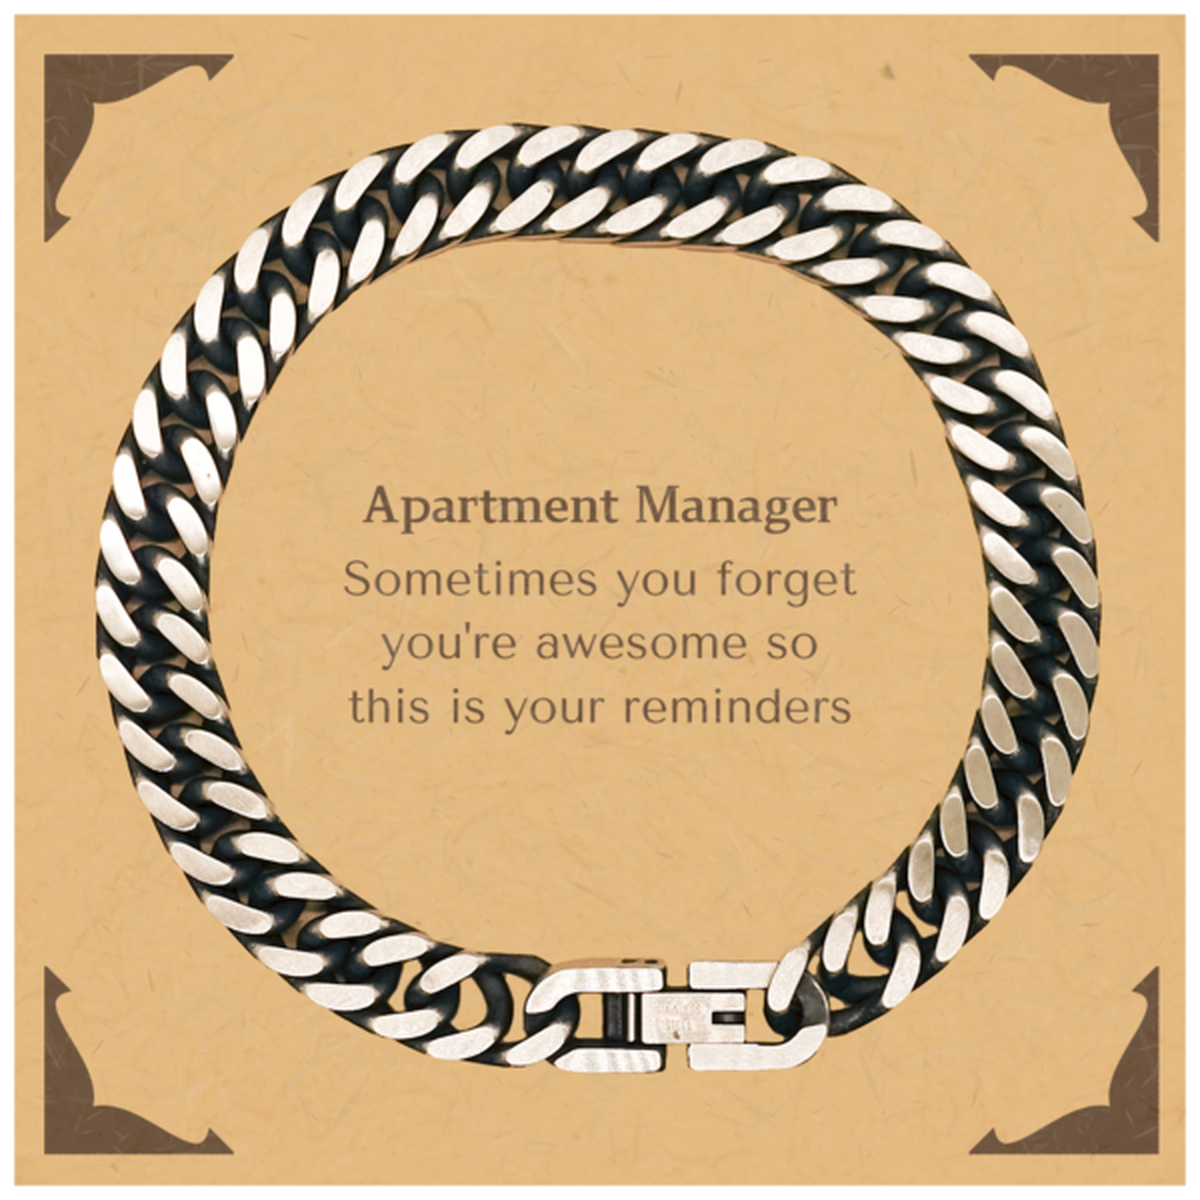 Sentimental Apartment Manager Cuban Link Chain Bracelet, Apartment Manager Sometimes you forget you're awesome so this is your reminders, Graduation Christmas Birthday Gifts for Apartment Manager, Men, Women, Coworkers